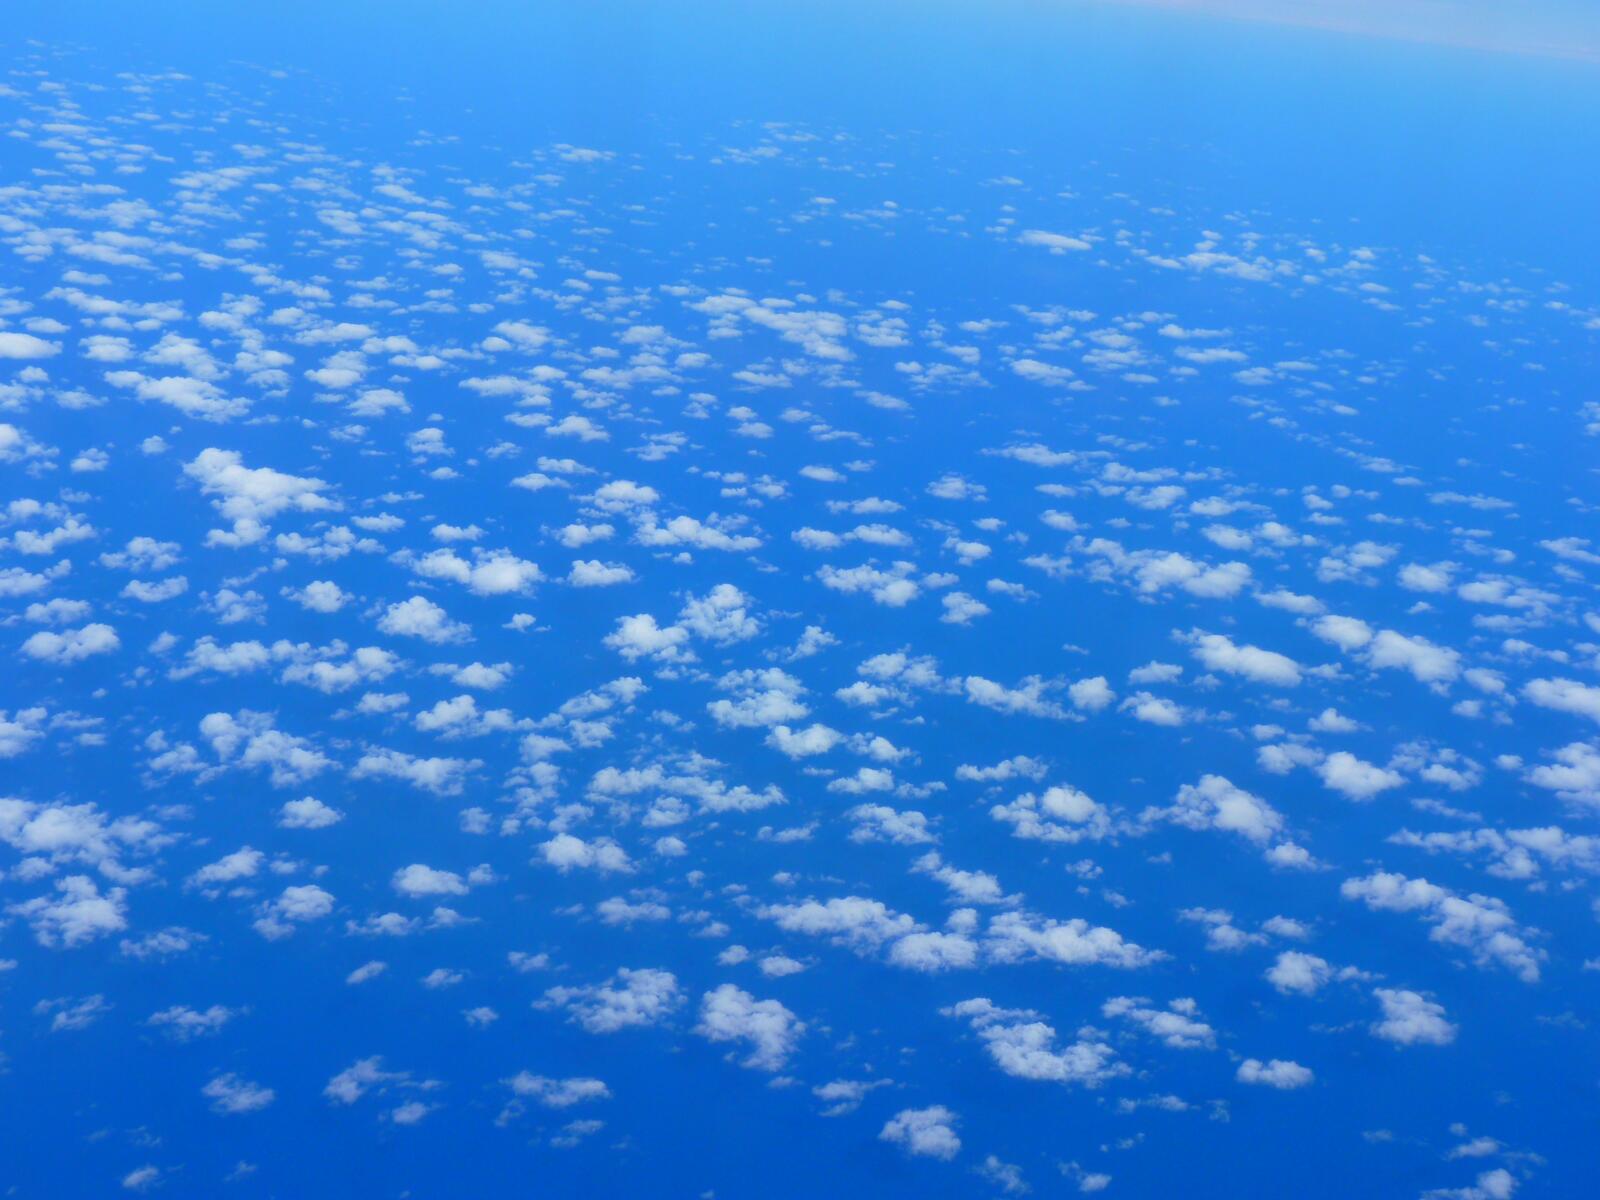 Free photo A view of the ocean through the clouds from an airplane